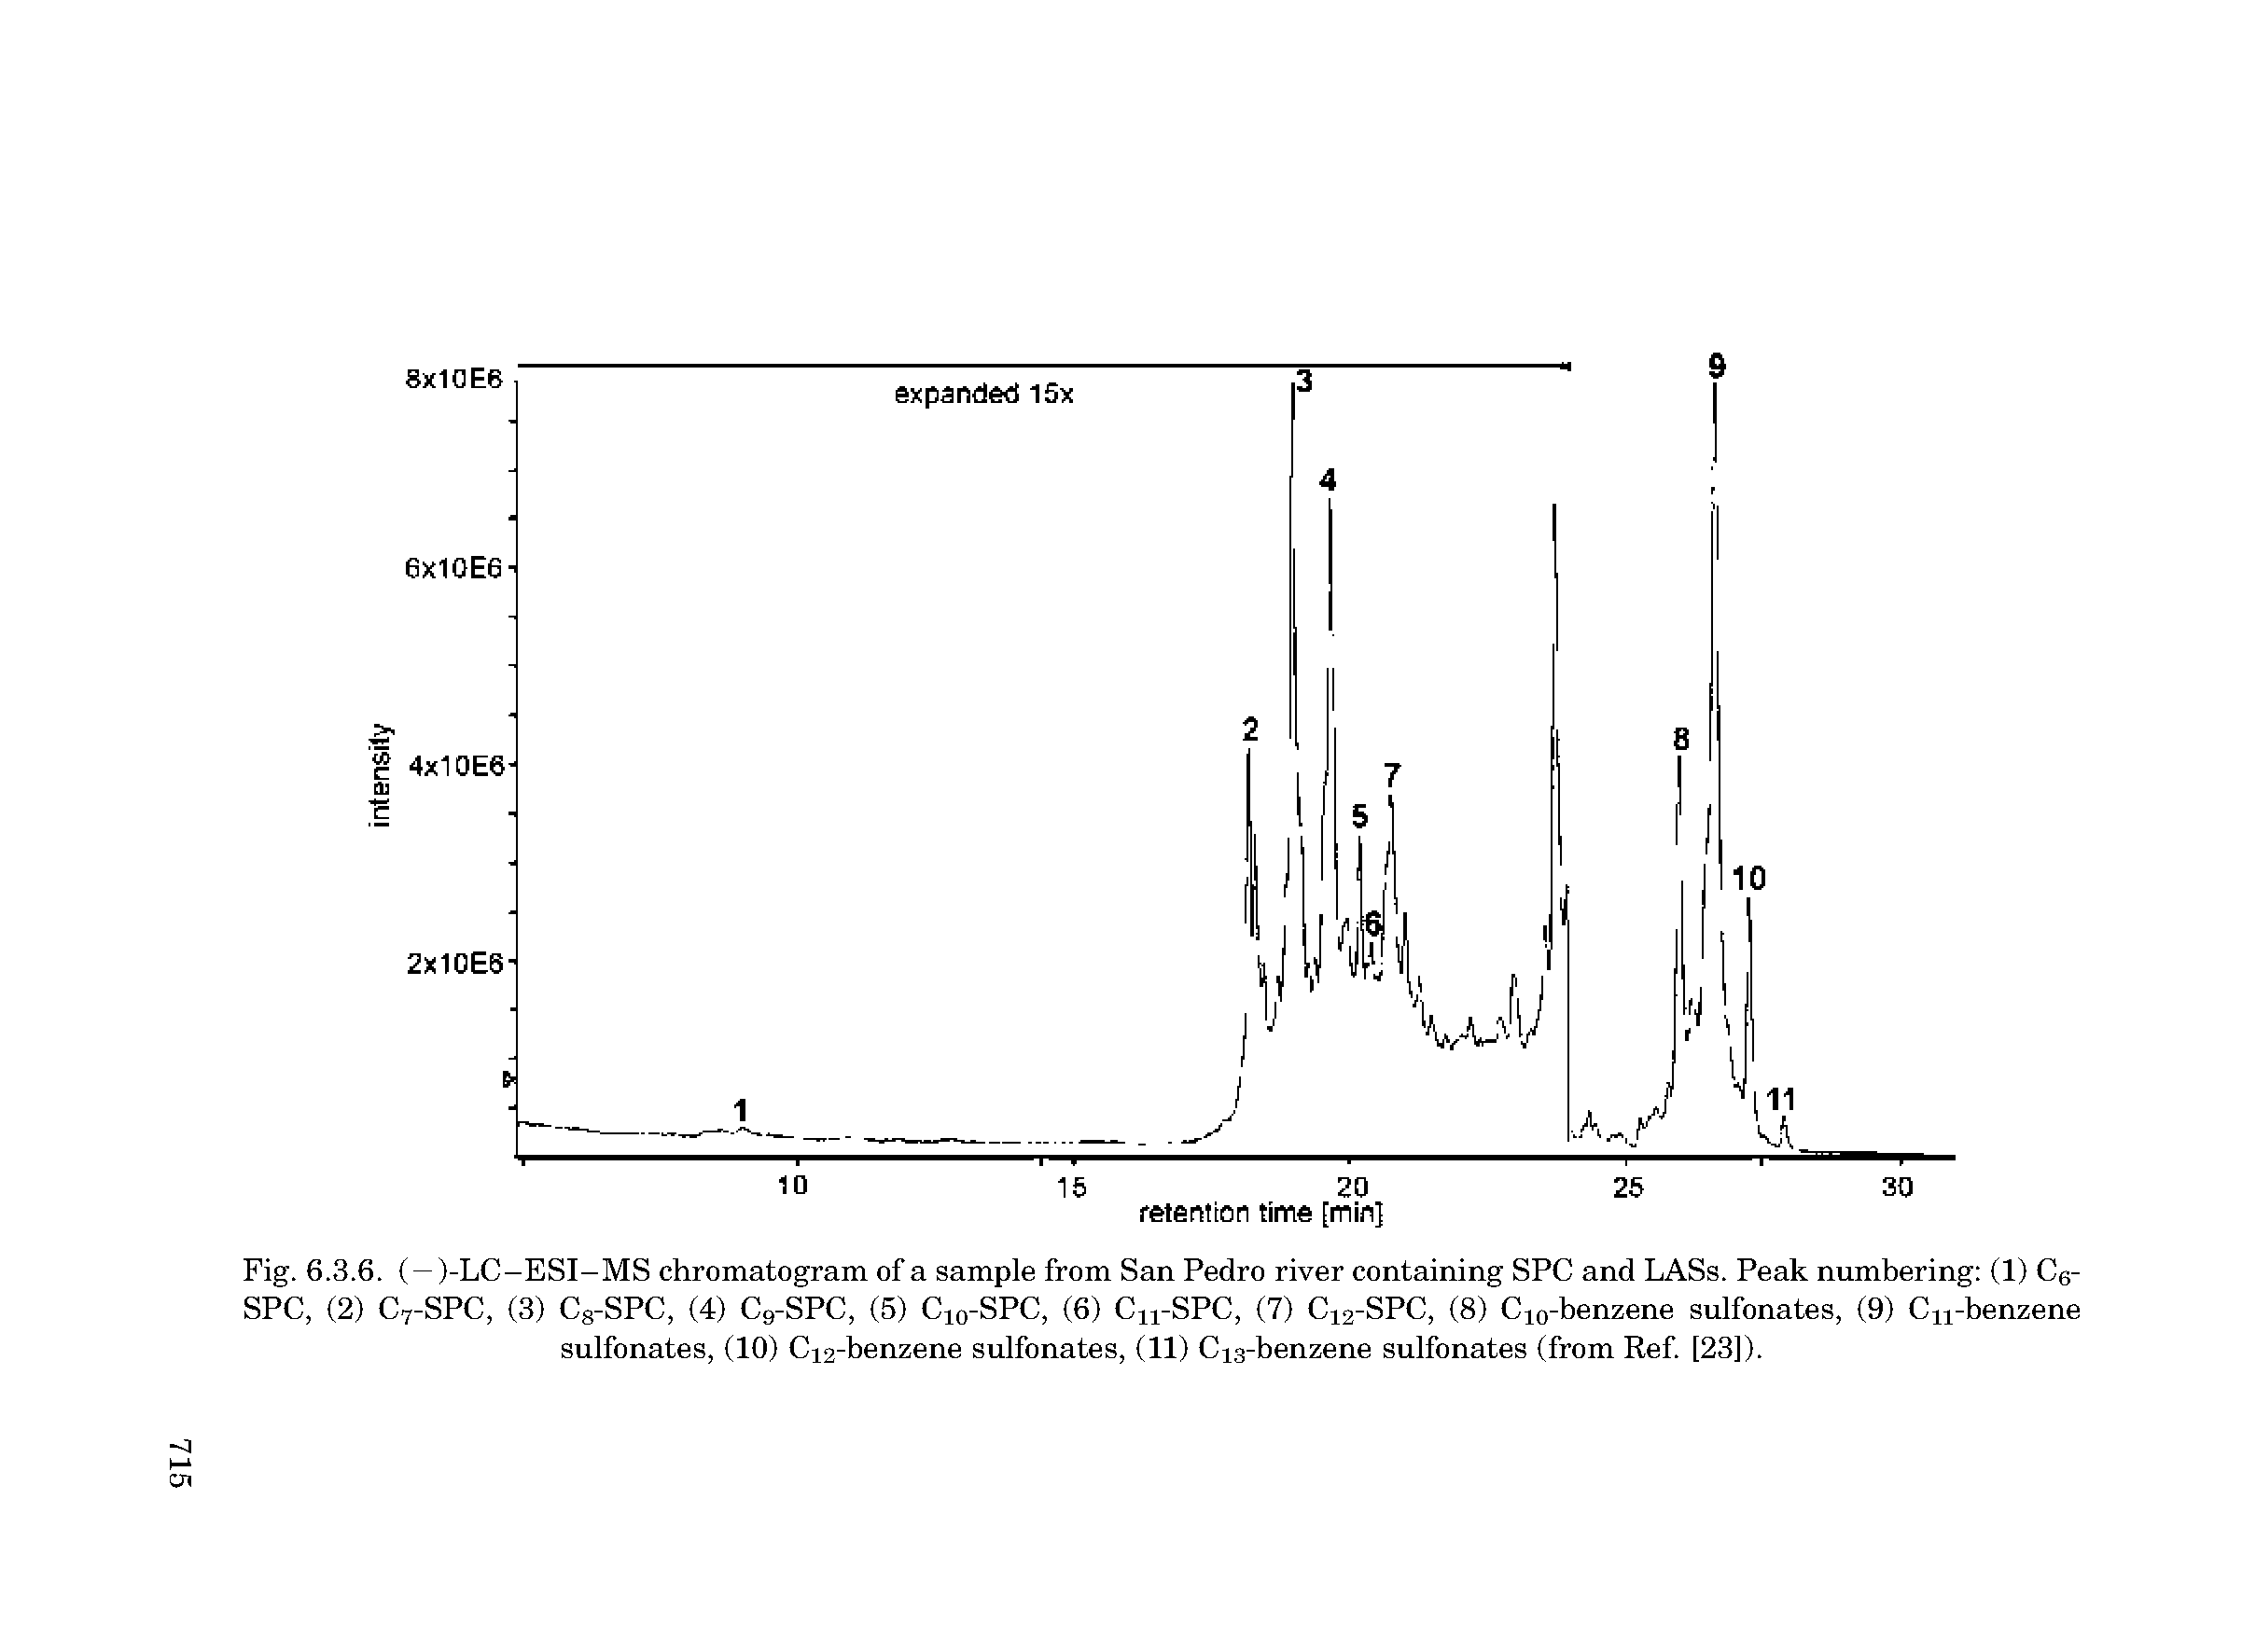 Fig. 6.3.6. ( —)-LC-ESI-MS chromatogram of a sample from San Pedro river containing SPC and LASs. Peak numbering (1) Cg-SPC, (2) C7-SPC, (3) Cg-SPC, (4) C9-SPC, (5) C10-SPC, (6) CU-SPC, (7) C12-SPC, (8) C10-benzene sulfonates, (9) Cu-benzene sulfonates, (10) Ci2-benzene sulfonates, (11) Ci3-benzene sulfonates (from Ref. [23]).